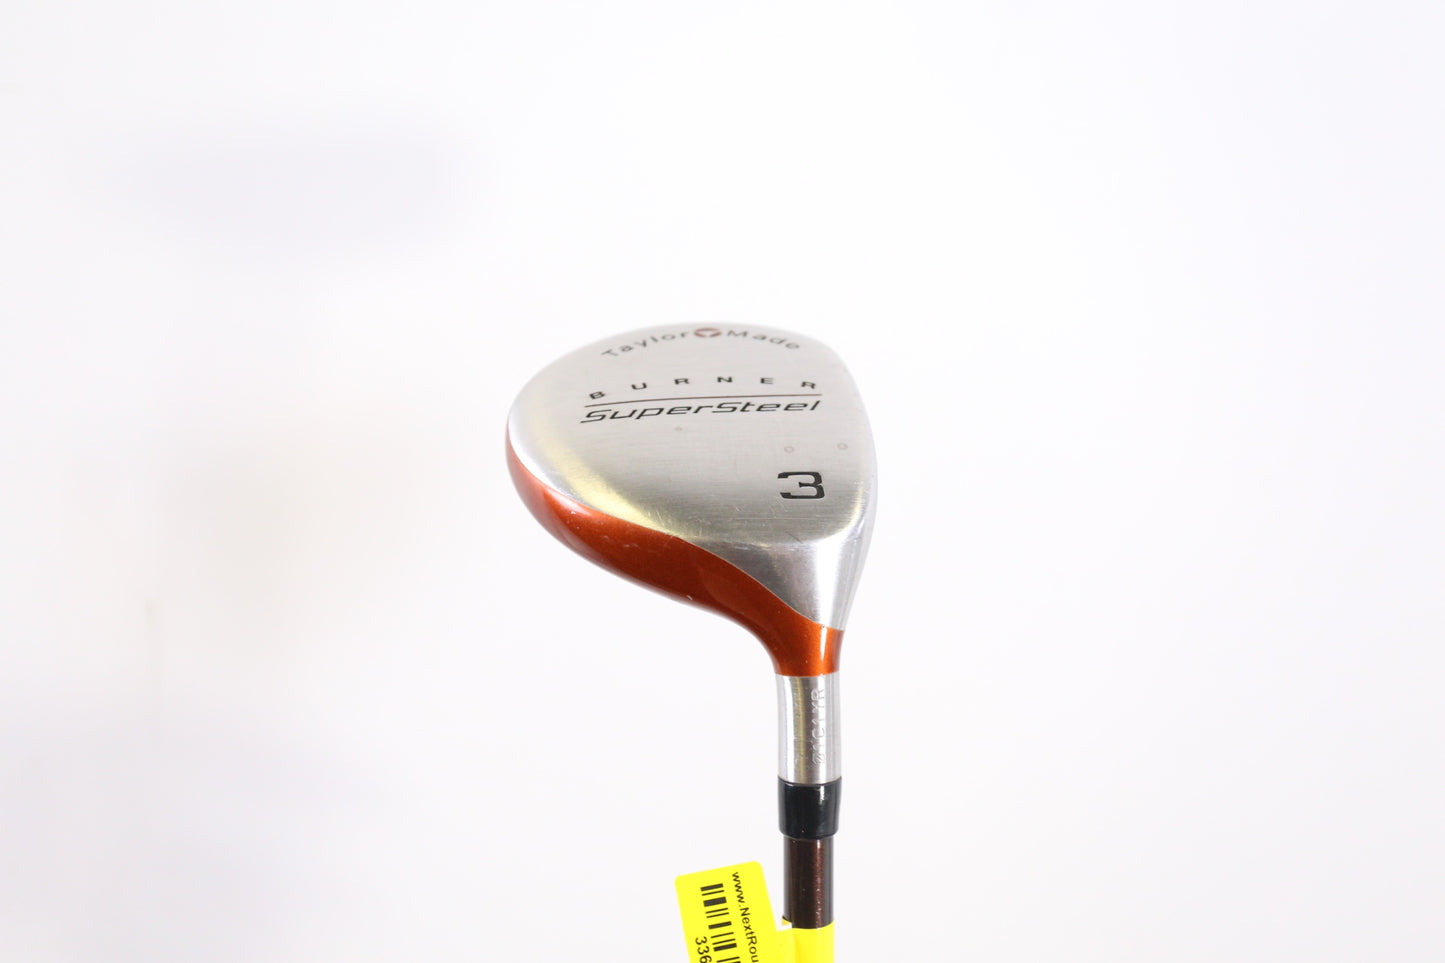 Used TaylorMade SUPERSTEEL 3-Wood - Right-Handed - 15 Degrees - Stiff Flex